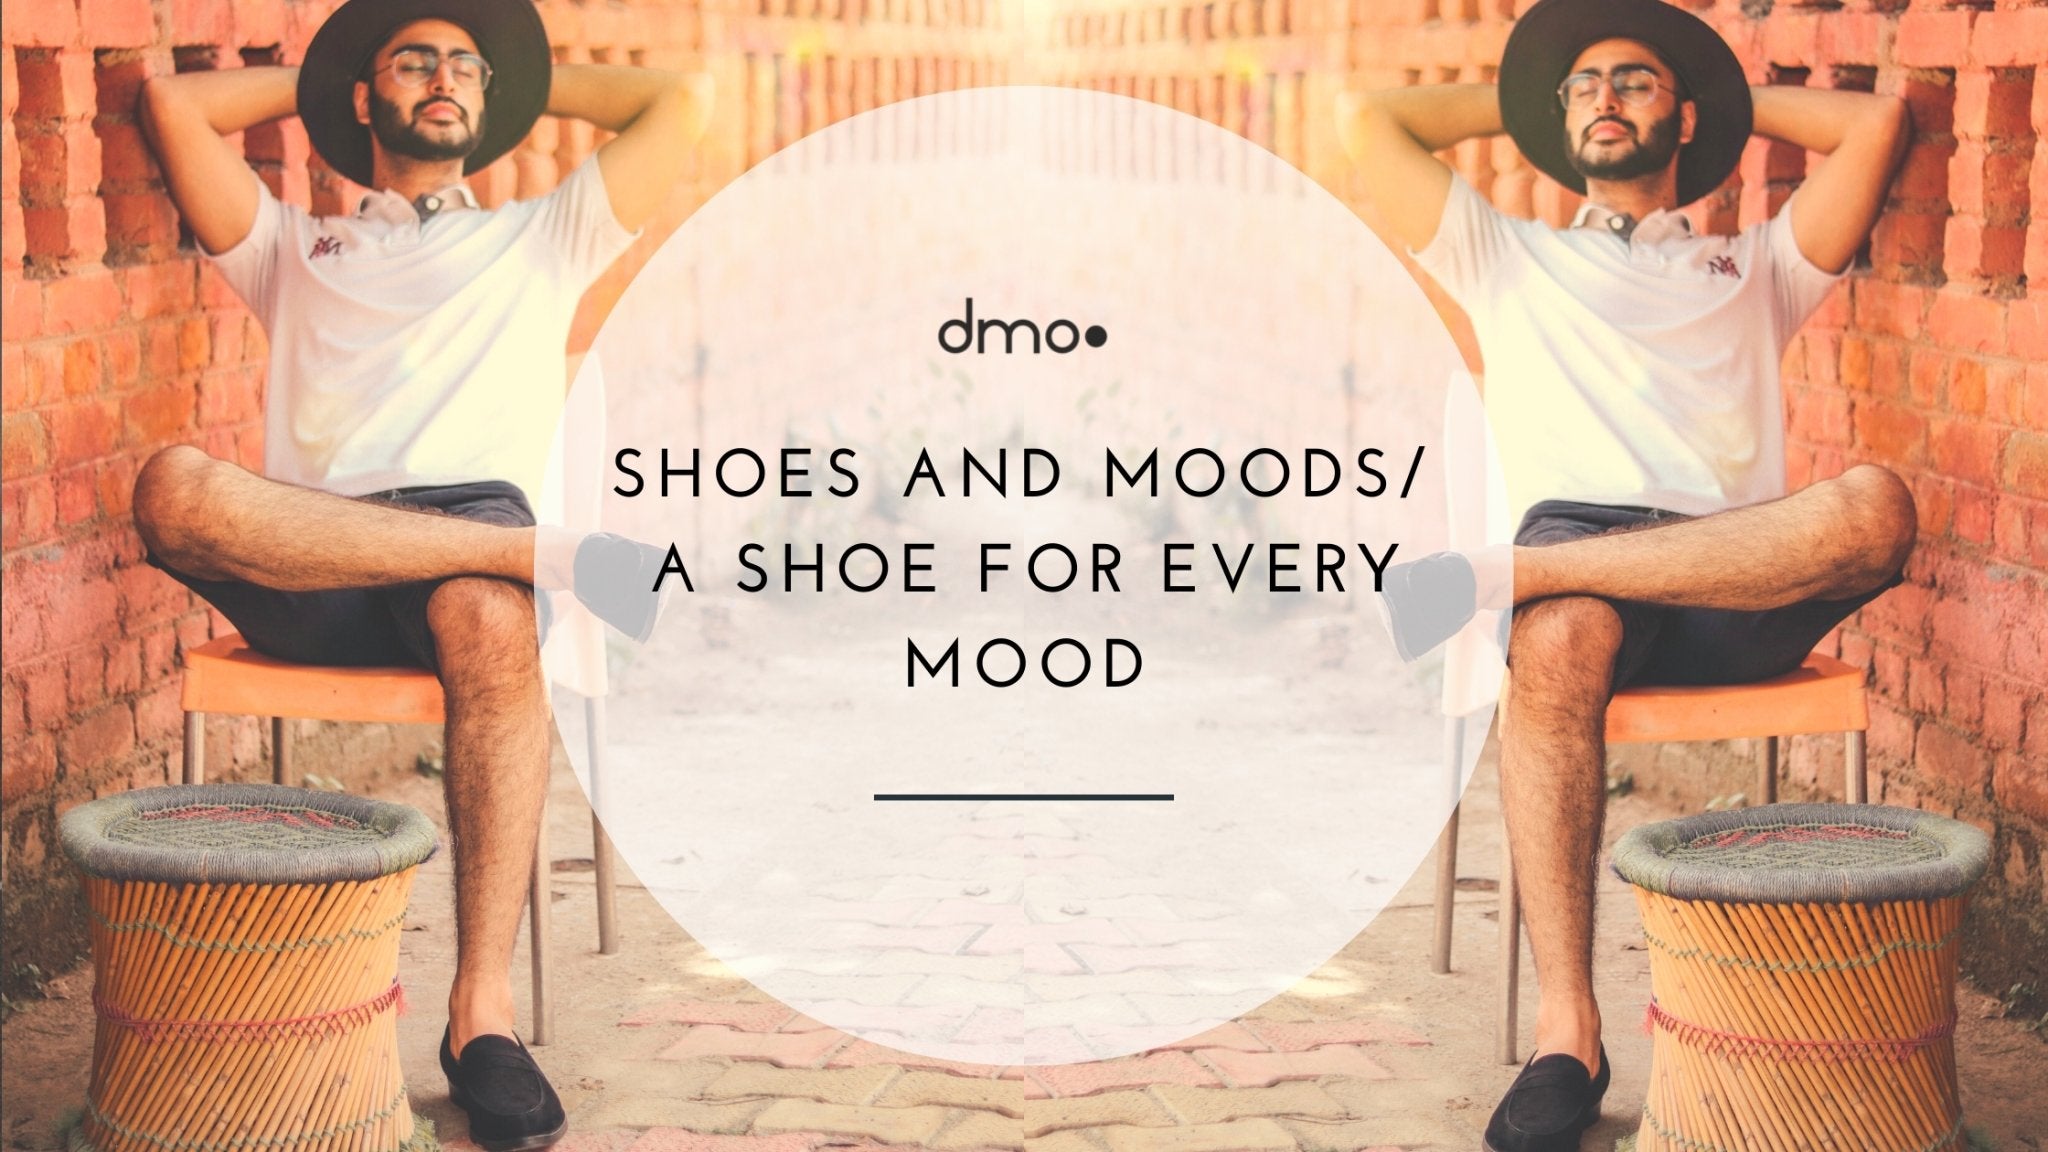 Shoes and moods/ A shoe for every mood - dmodot Shoes